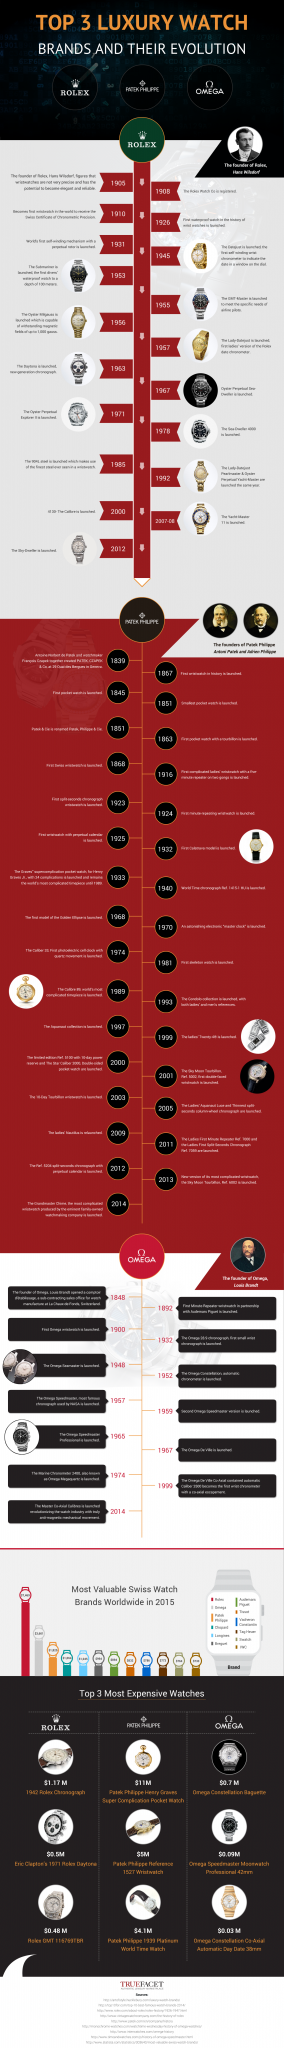 TrueFacet_Top 3 Luxury Brands and Their Evolution-v2